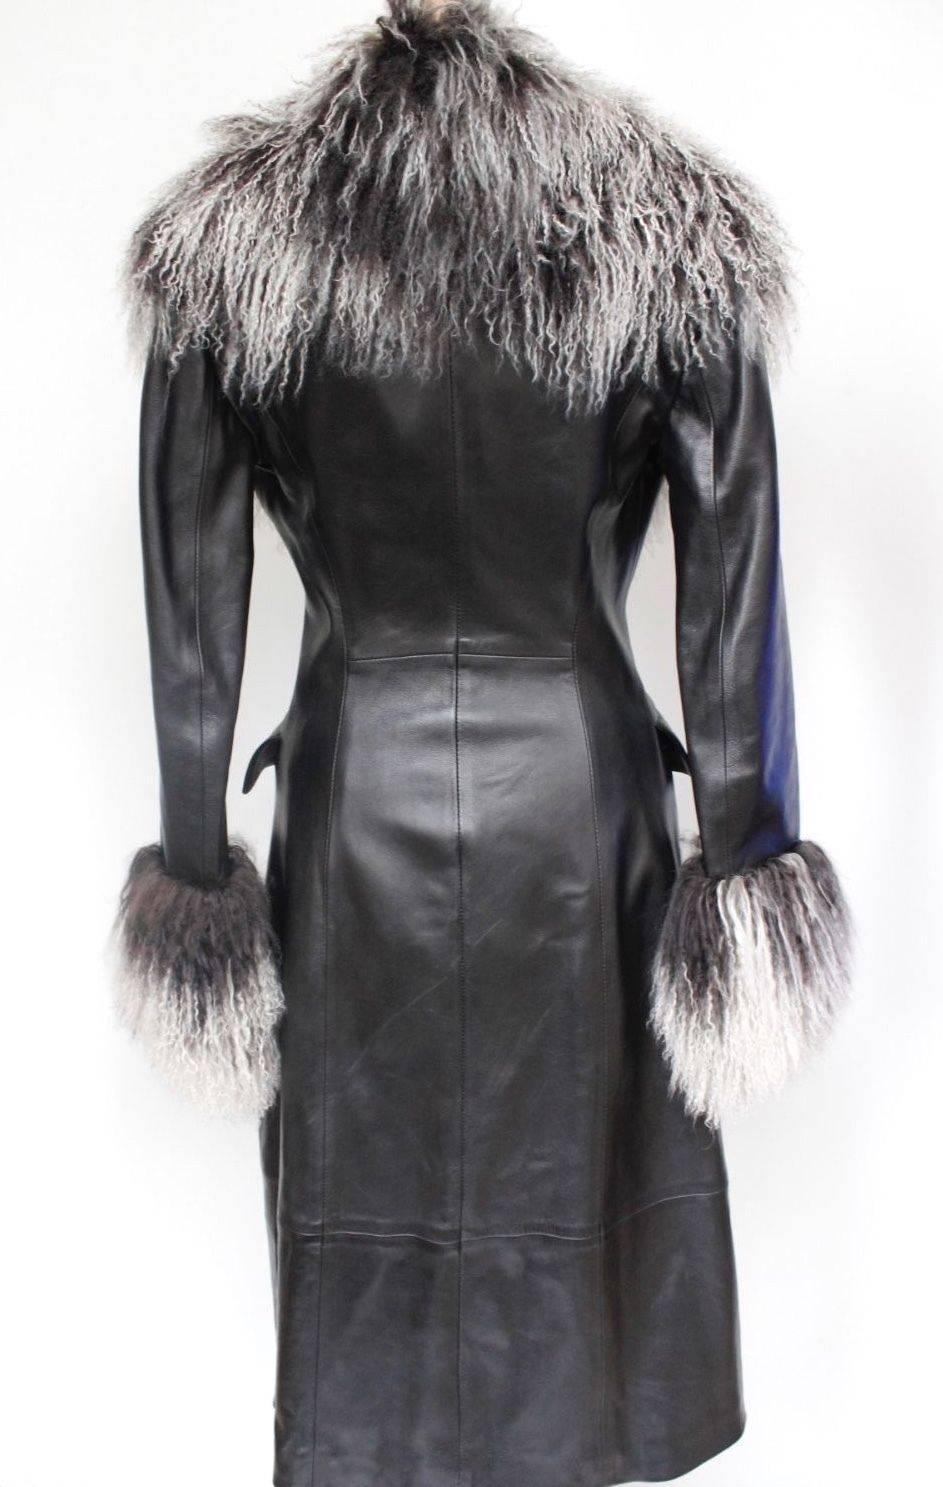 Jitrois Black Leather Mongolian Fur Trim Coat F 38 uk 10 
Glamorous coat from Jitrois featuring oversized fur collar and cuffs 
Double breasted fastening with pearl logo buttons 
Pockets to the hips, fully lined 
Length 43 length, sleeve 23